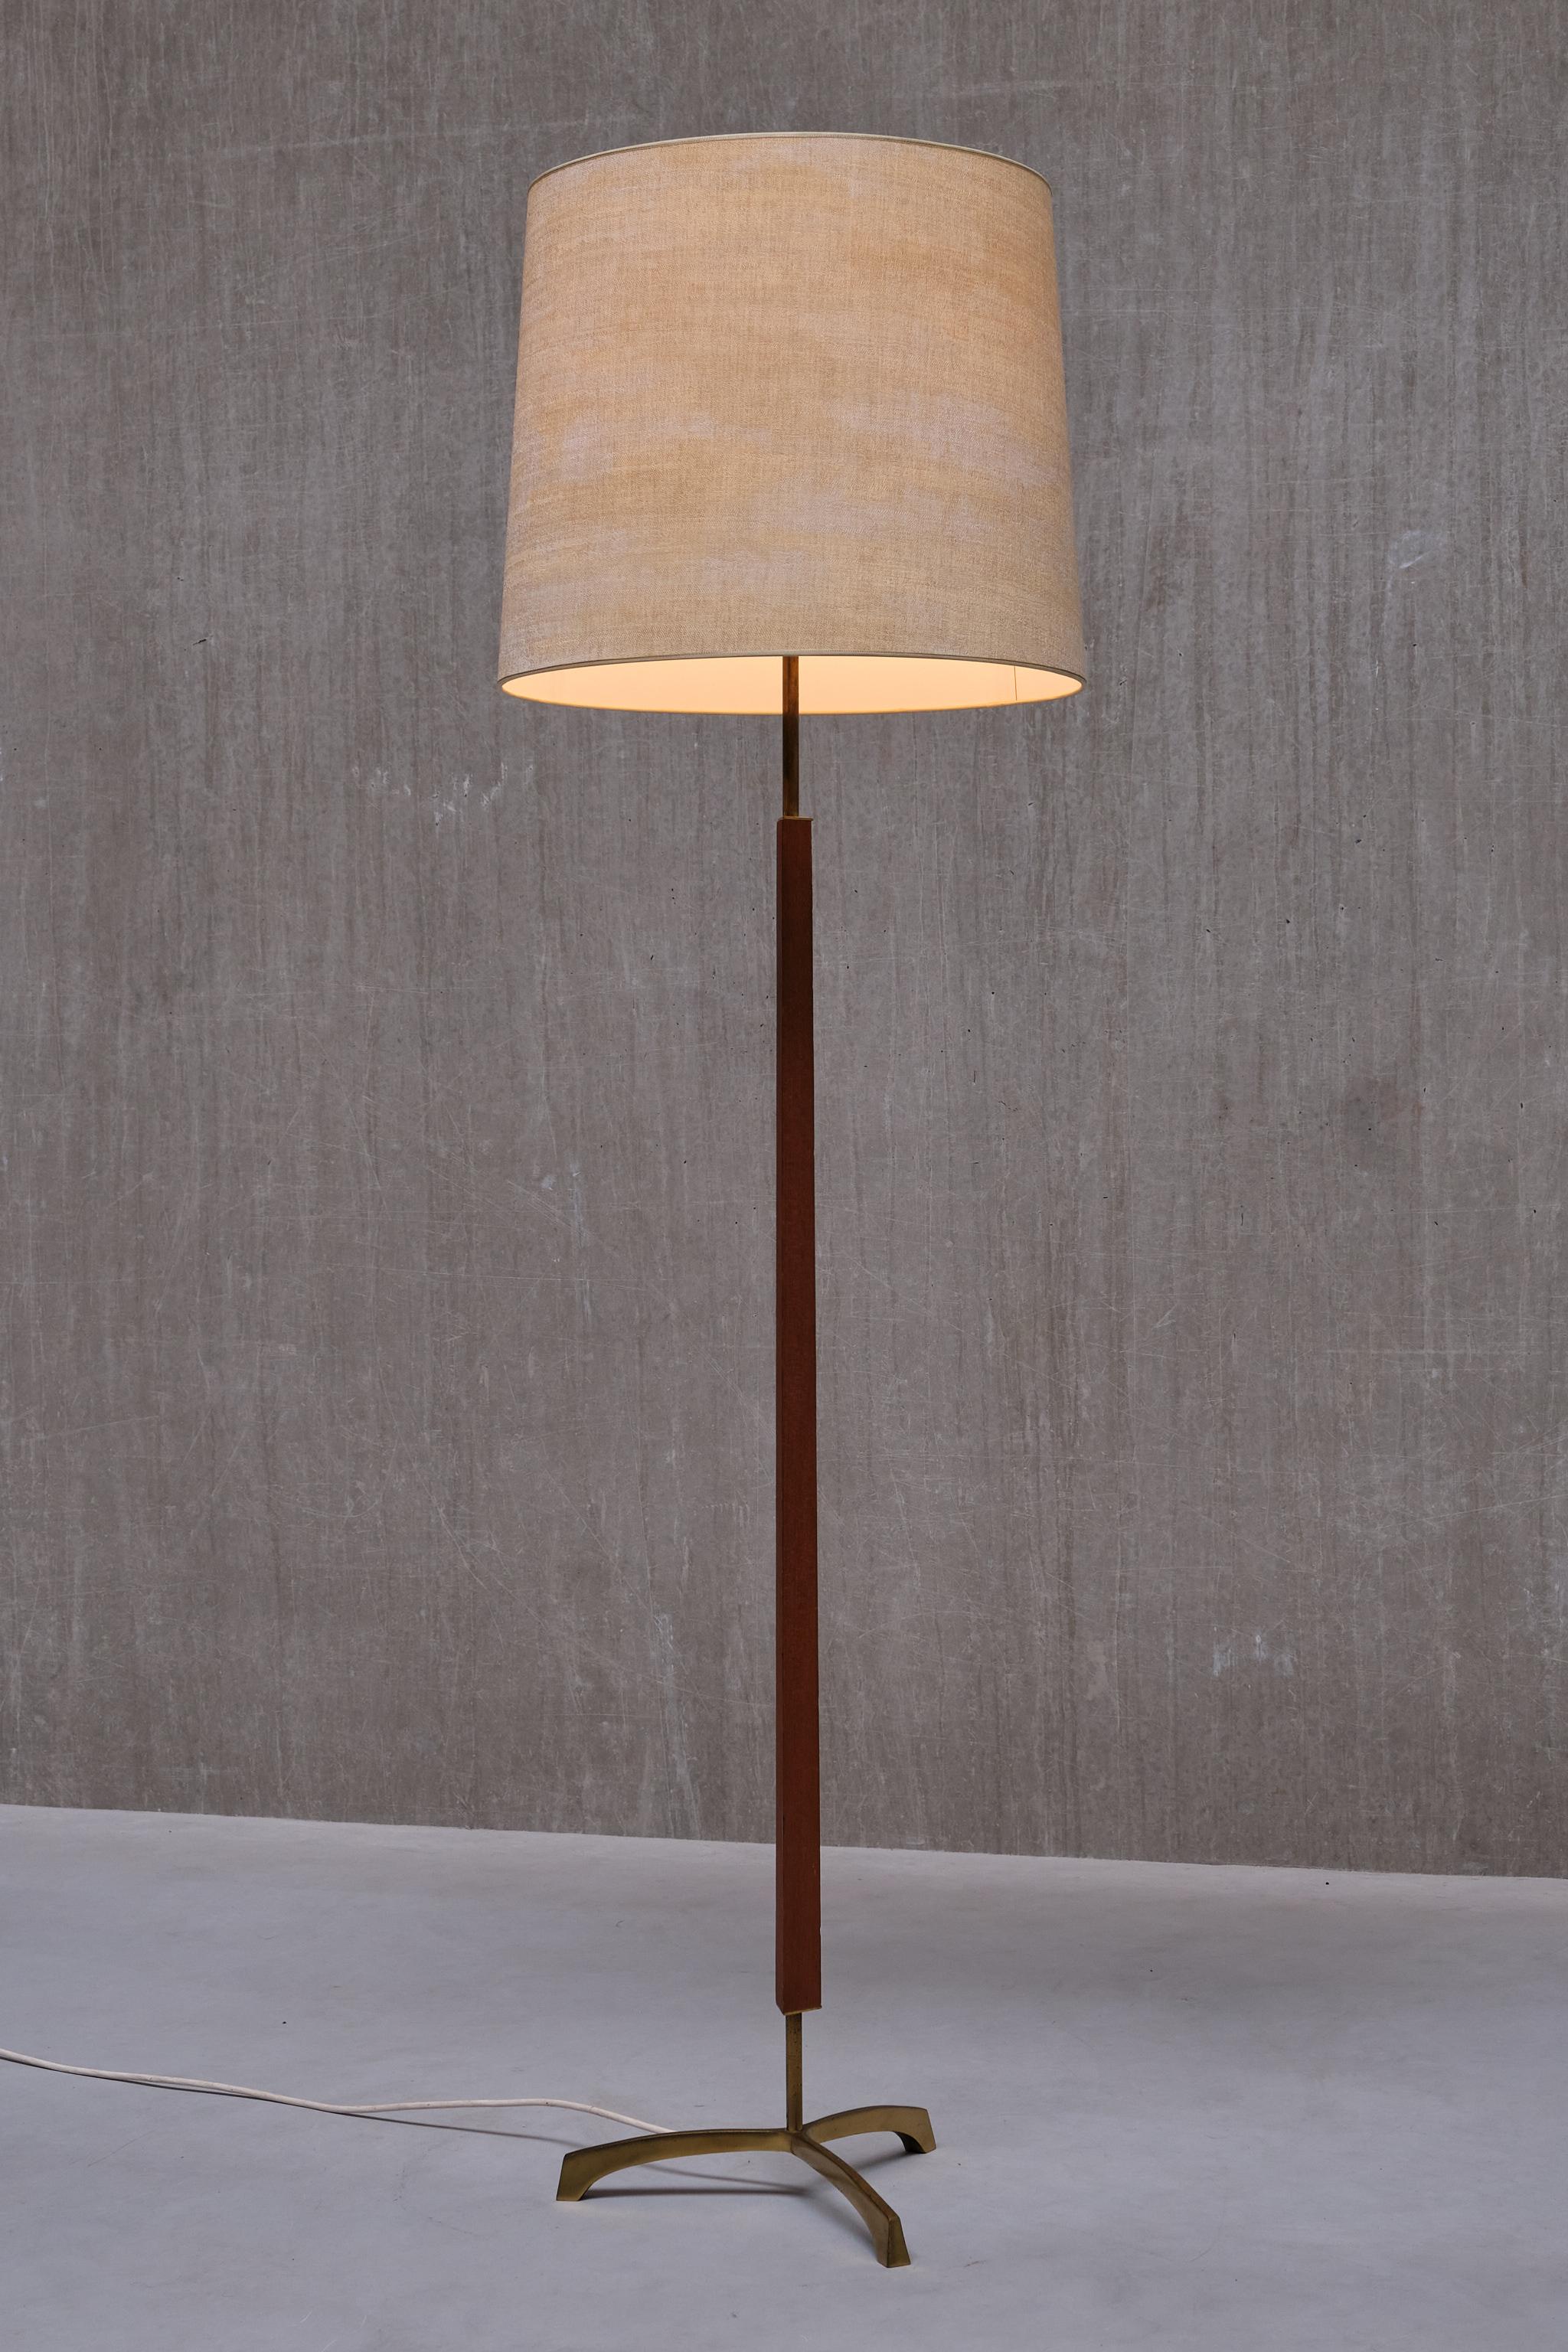 Danish Modern Three Legged Floor Lamp in Brass, Teak and Textured Shade, 1950s In Good Condition For Sale In The Hague, NL